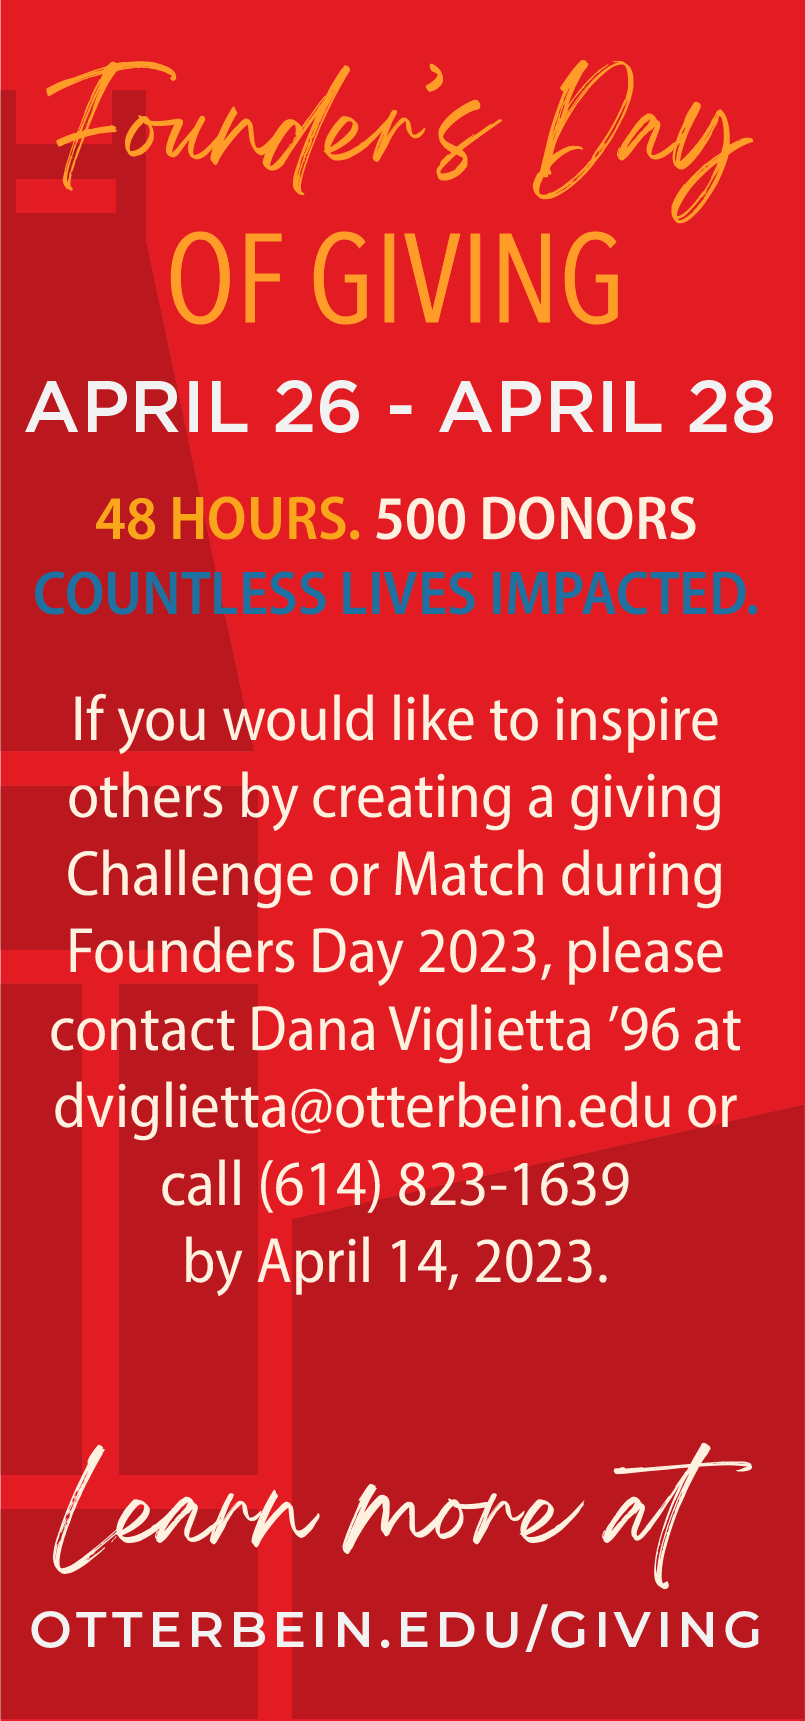 Founders Day of Giving is April 26th - April 28th. Learn more at otterbein.edu/giving